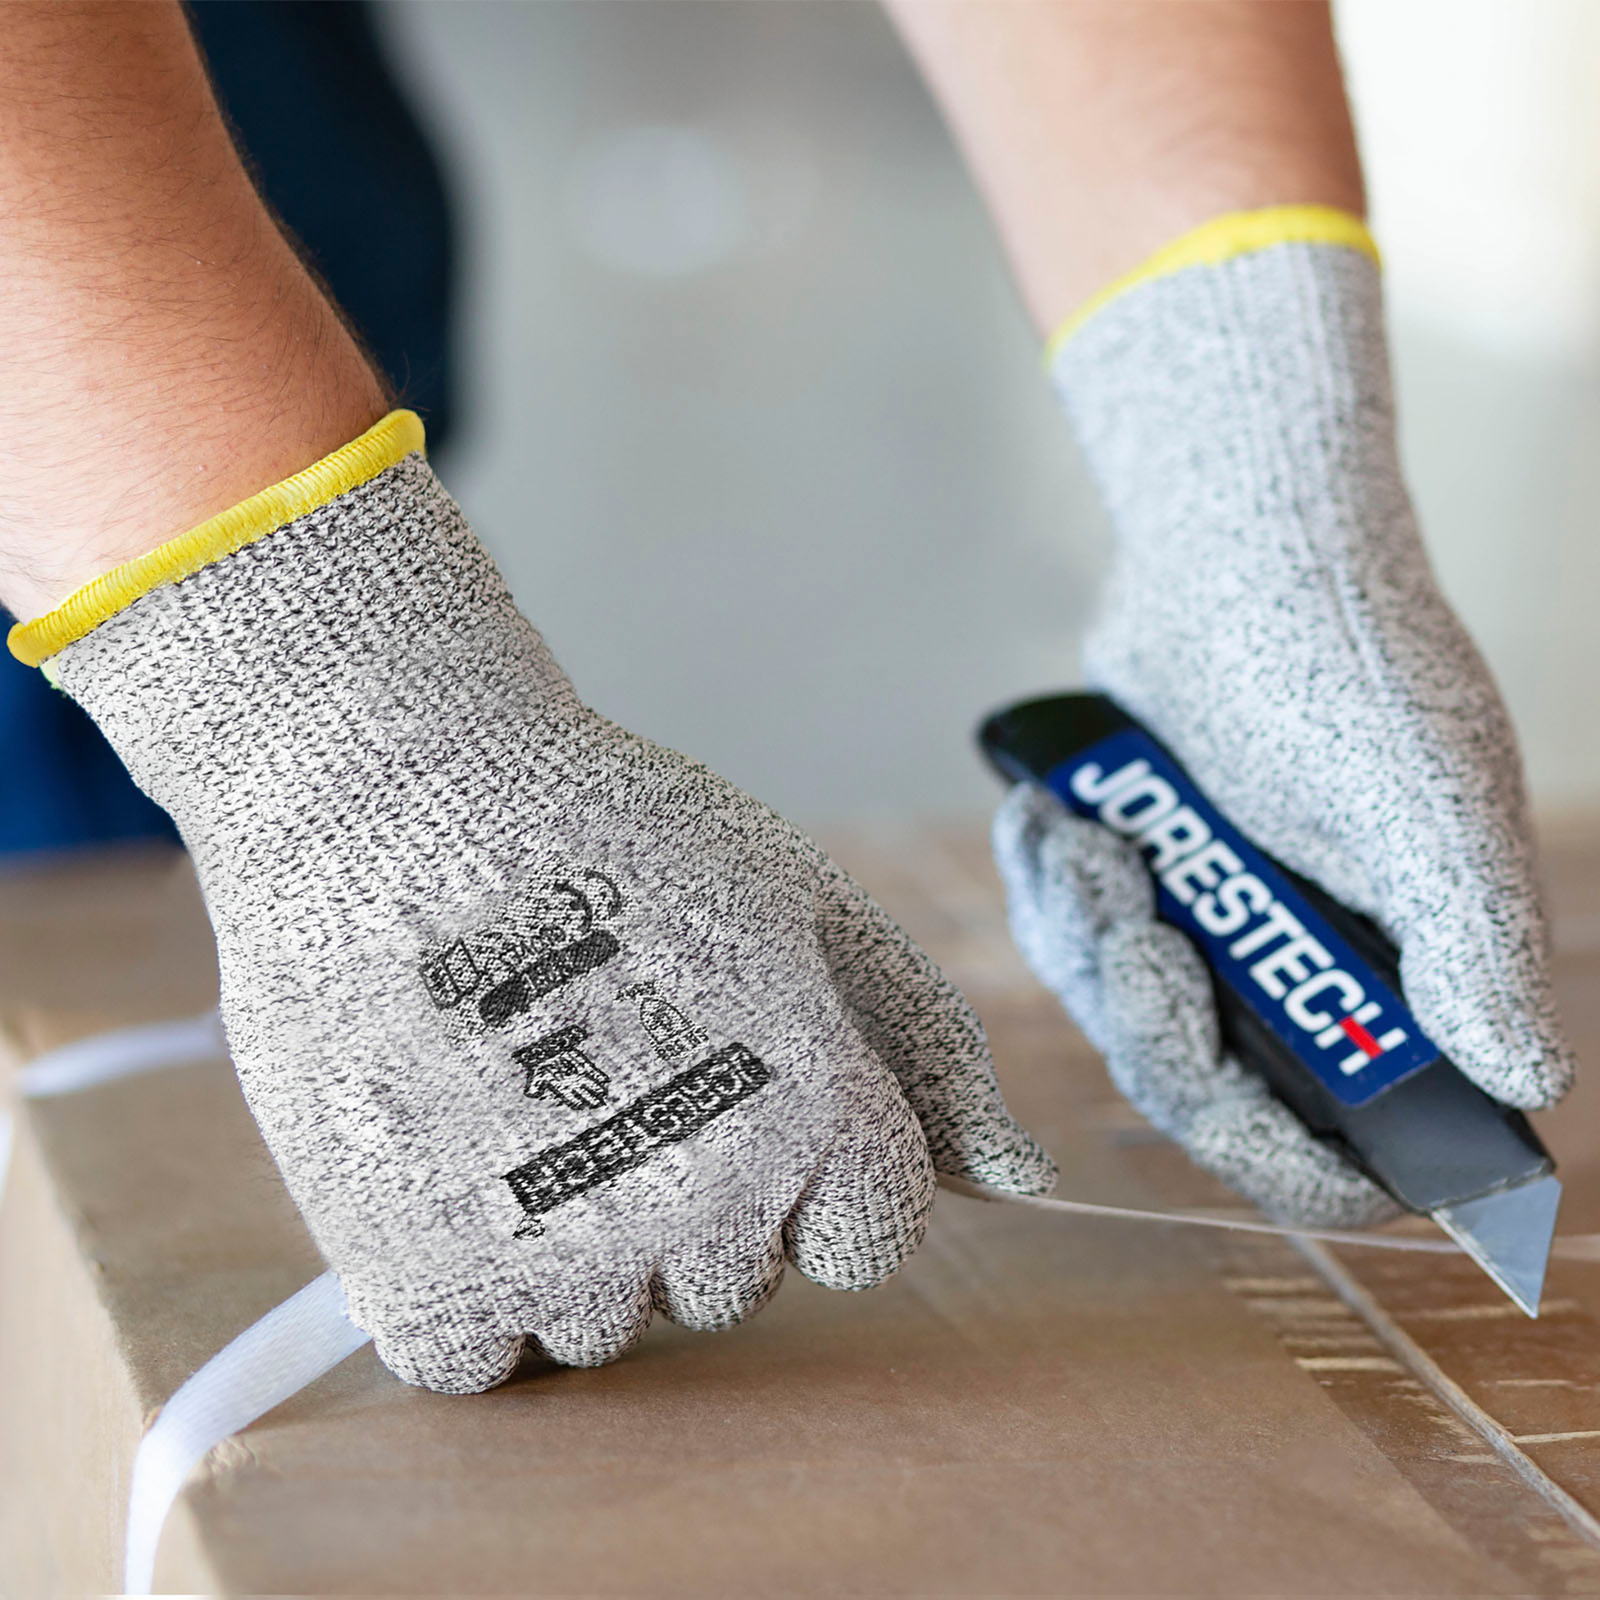 Hands of a person wearing the Jorestech cut resistant multi purpose safety work glove while cutting a strap with a box cutter